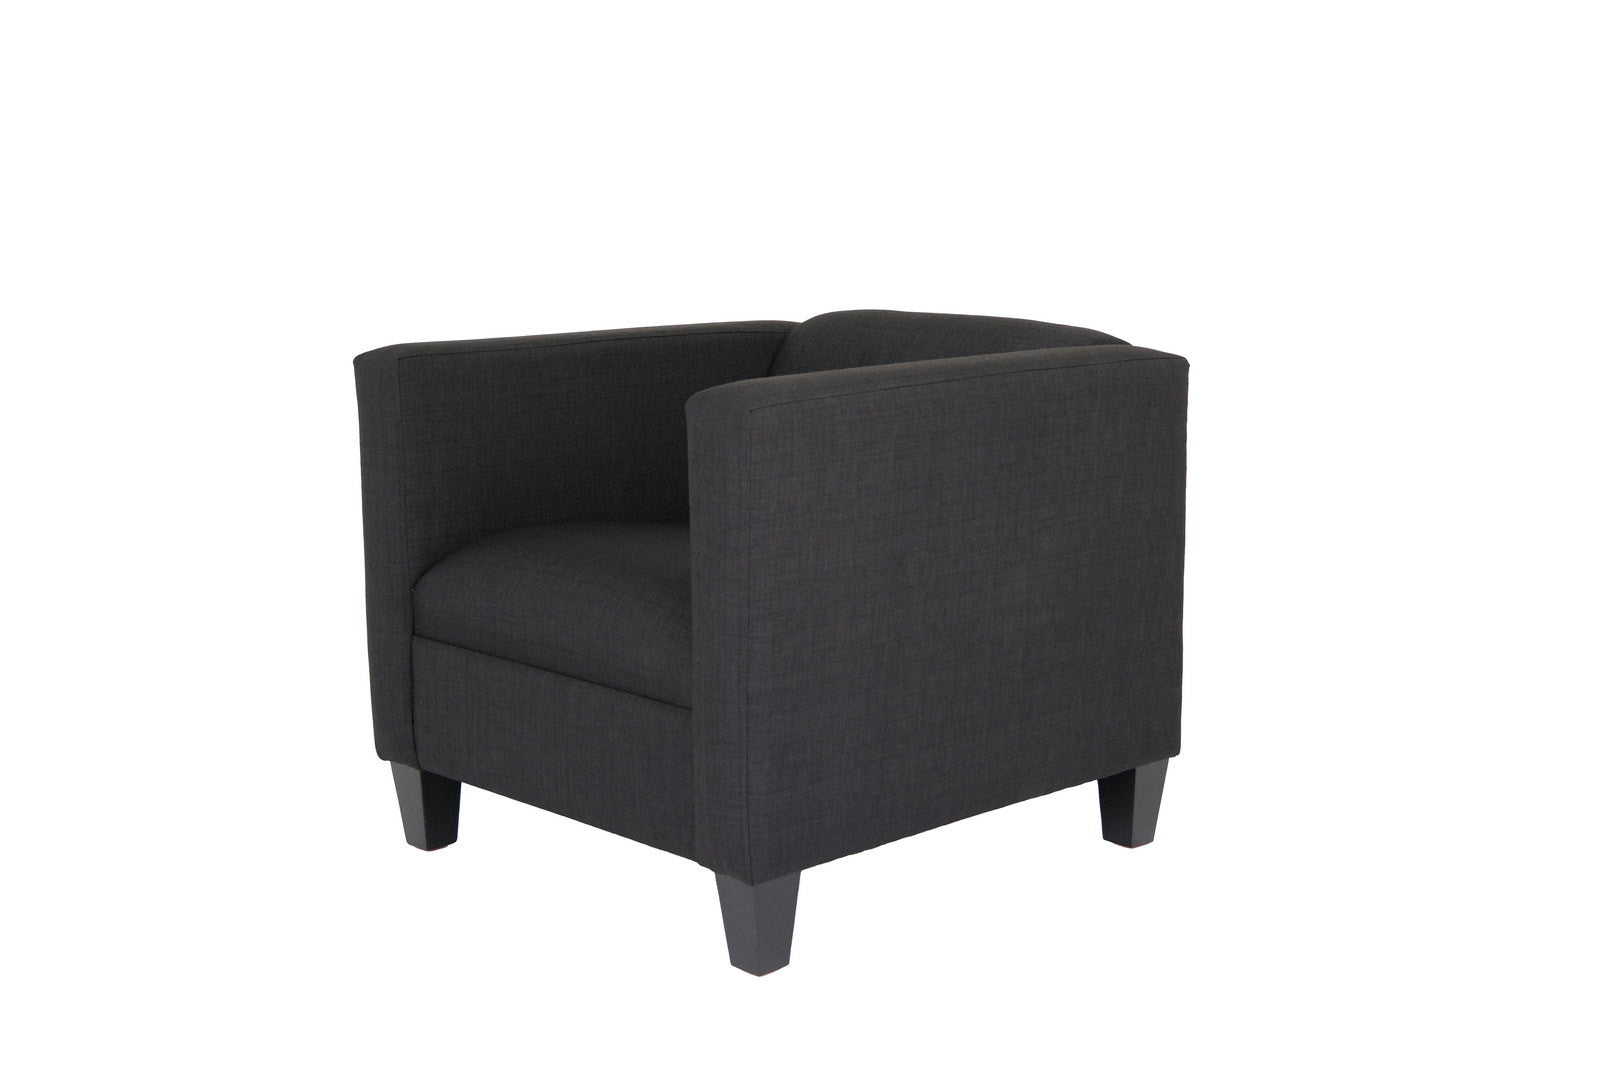 30" Black And Dark Brown Polyester Blend Arm Chair